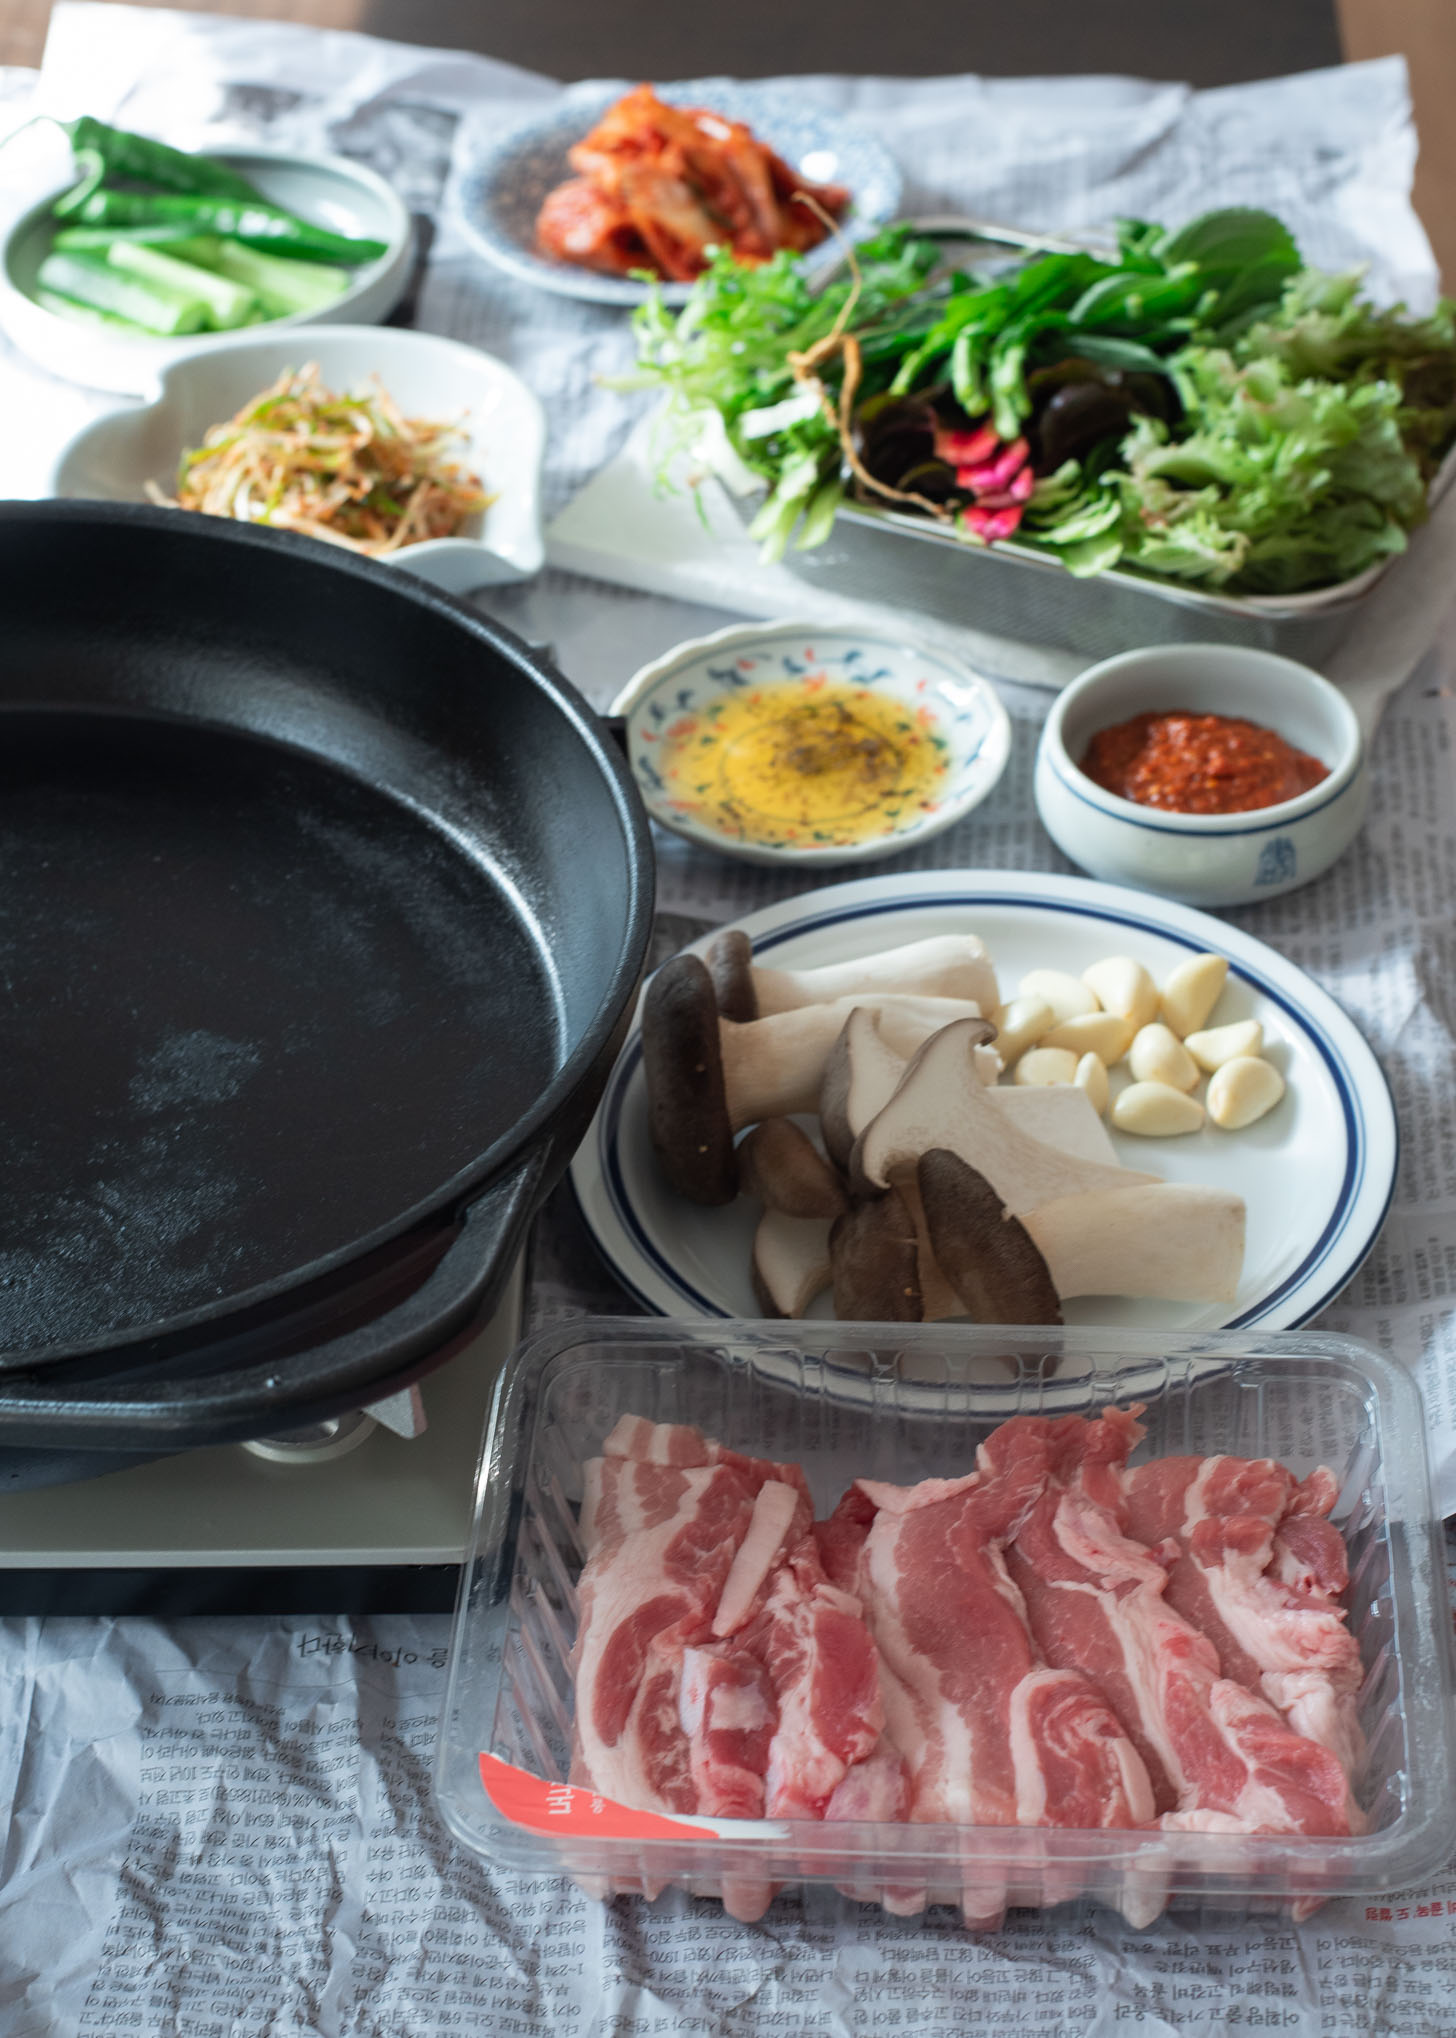 A large grill pan is placed on a table along with pork and side dishes around.